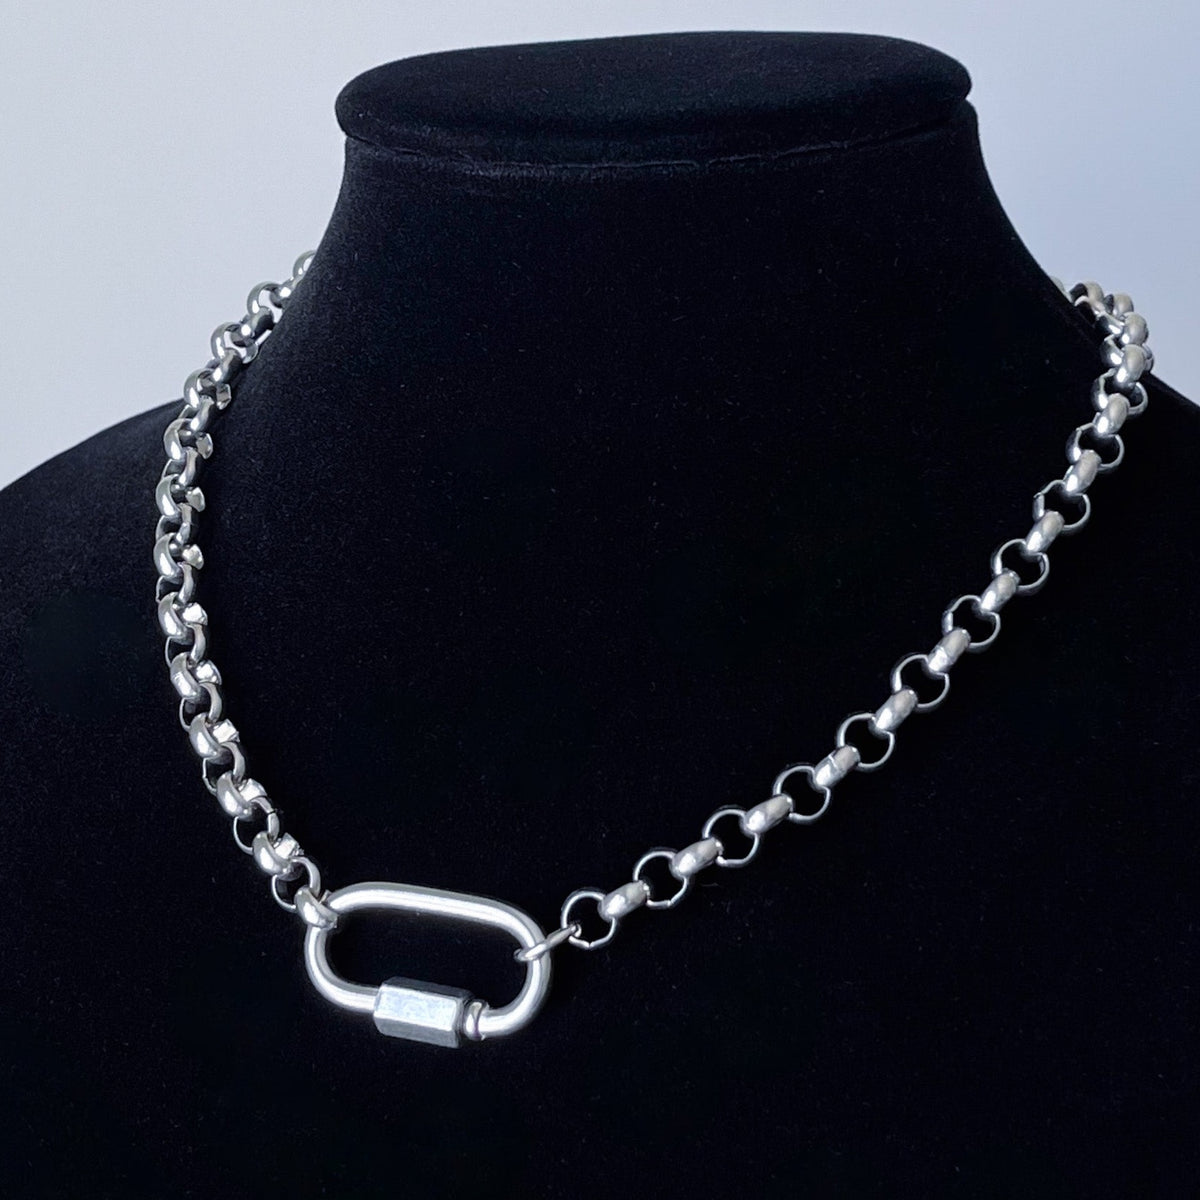 Carabiner Big Bold, Unisex, Necklace, Carabiner Silver Pendant, Large Stainless  Steel Links Necklace - Construction Jewelry